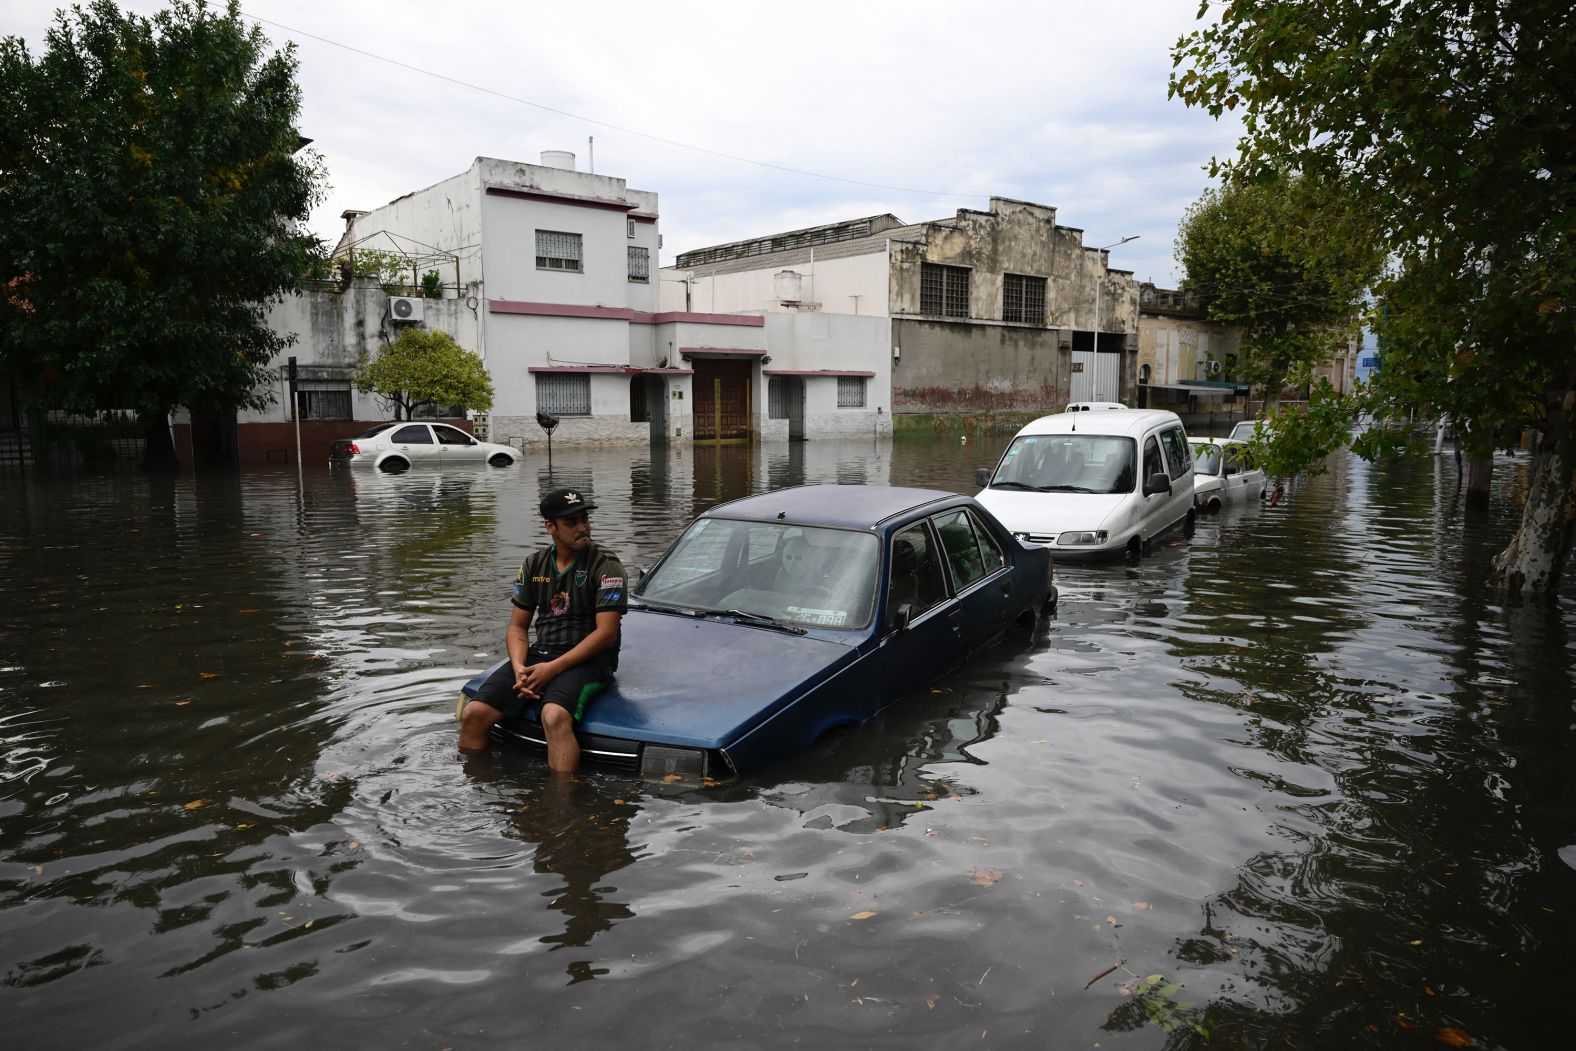 A man sits on the hood of his car in a flooded street in Avellaneda, Argentina, on Tuesday, March 12. Storms flooded parts of Buenos Aires and the area around it.